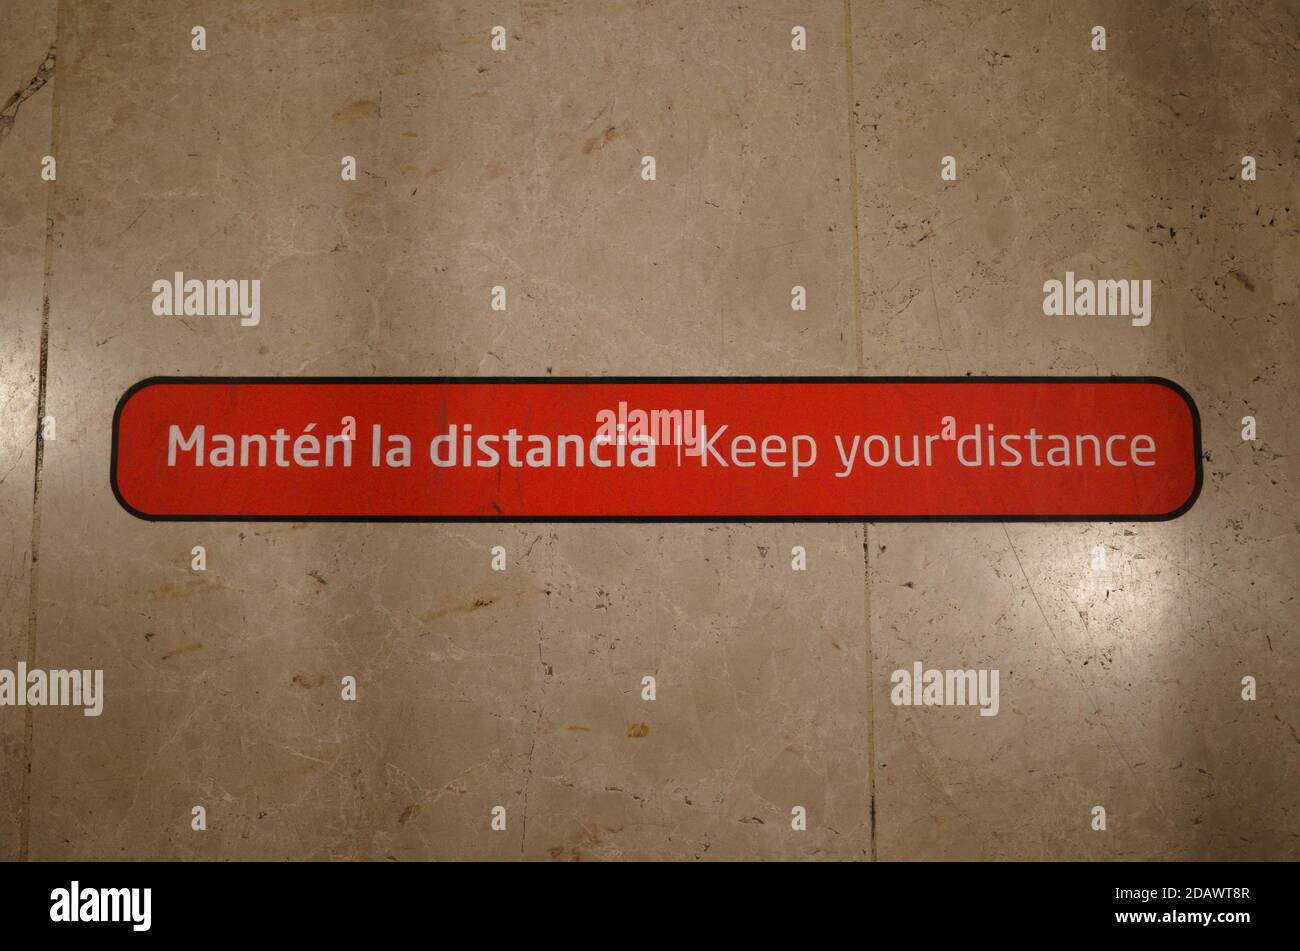 Keep your distance warning message on the floor of international airport during pandemic written in Spanish and English languages. Stock Photo